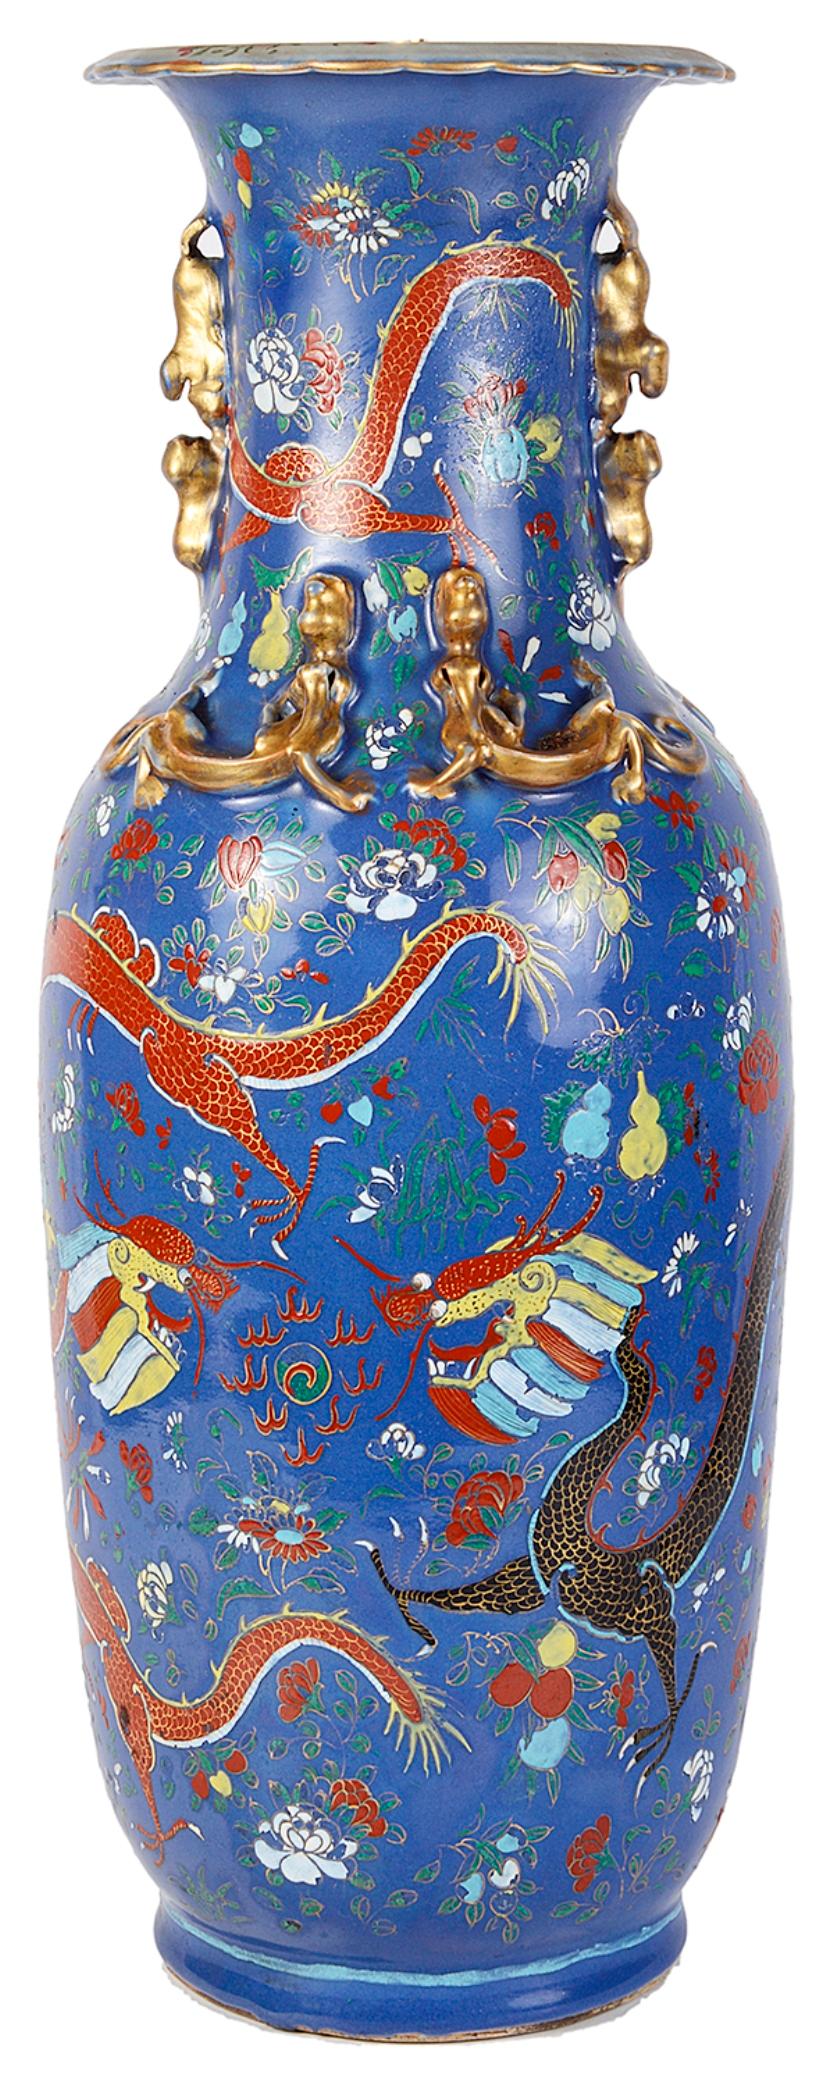 An unusual 19th century Chinese blue ground porcelain vase or lamp. Having wonderful mythical dragons amongst flowers and classical motifs.